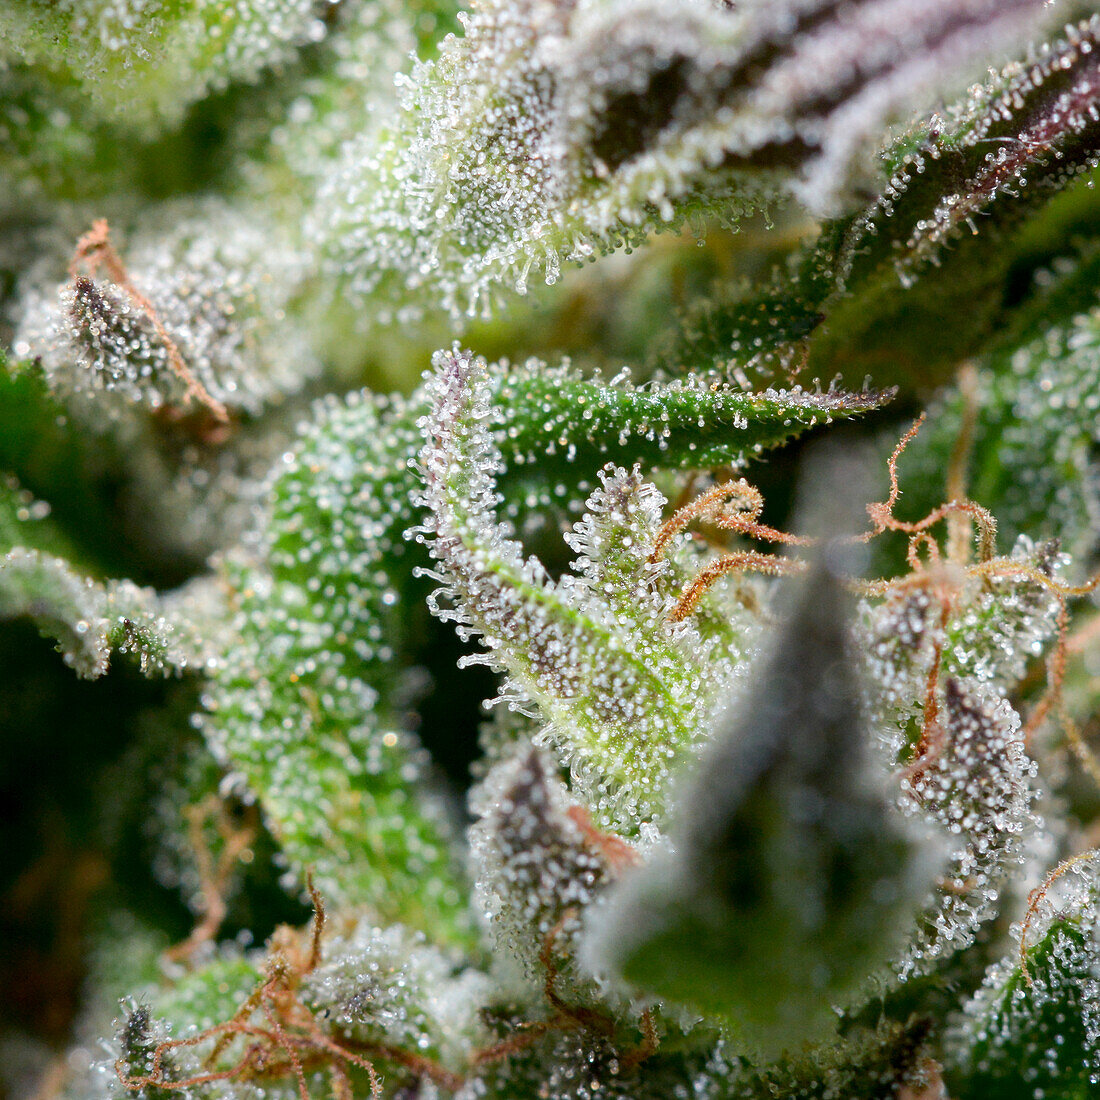 Denver, Colorado- Macro perspective of cannabis trichomes grown for recreational and medical use